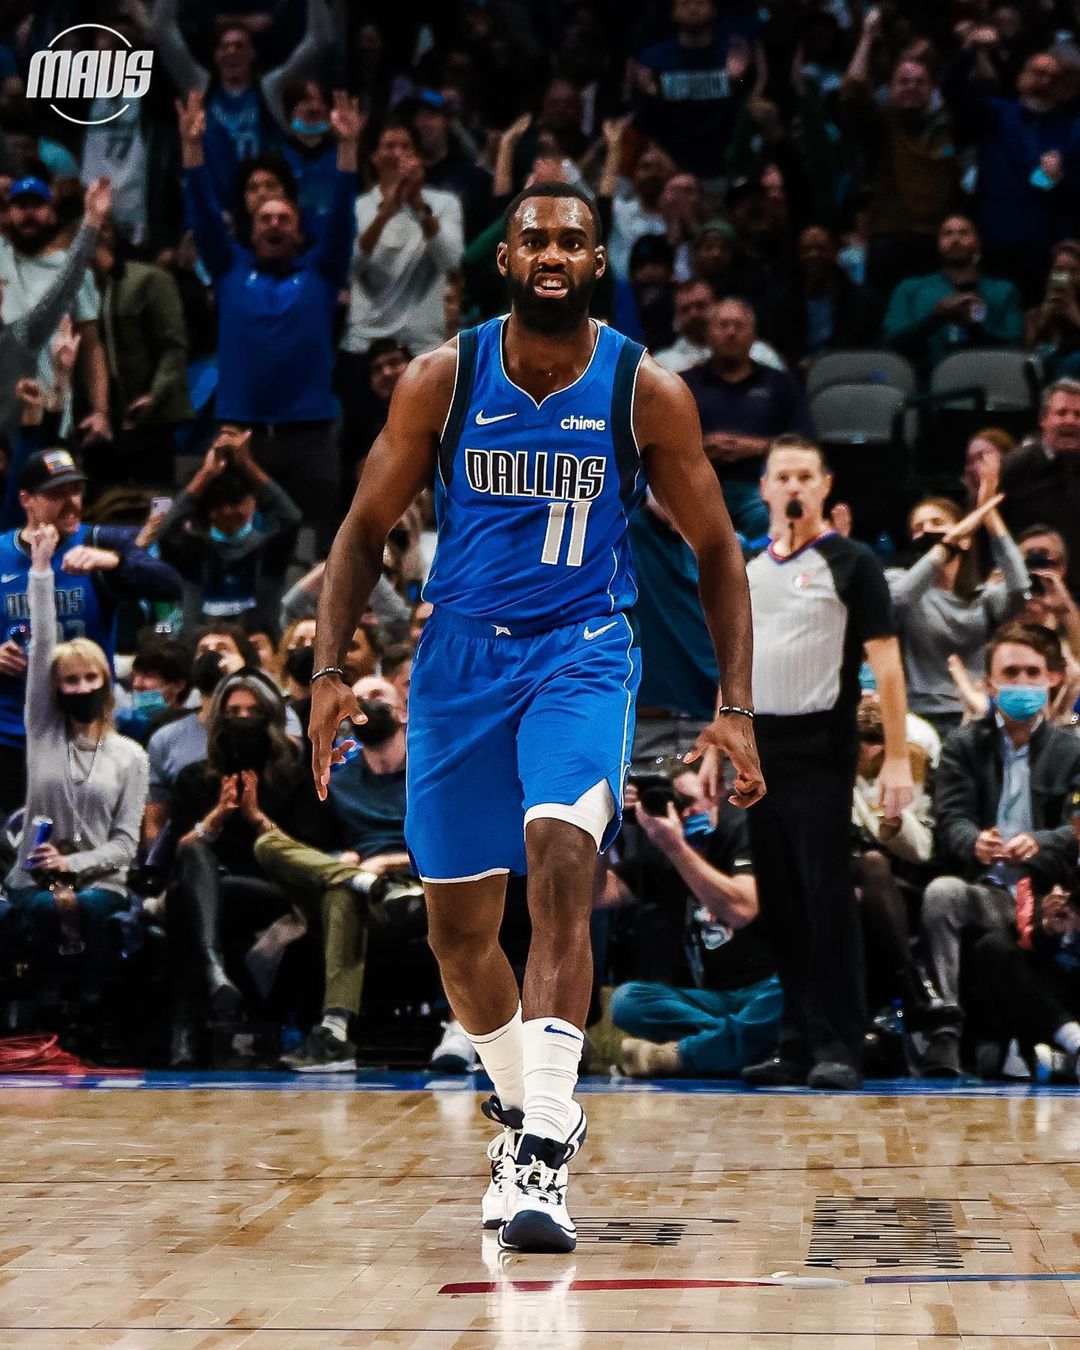 Get well soon @timmyjr10  We know you’ll come back stronger than ever  #MFFL...